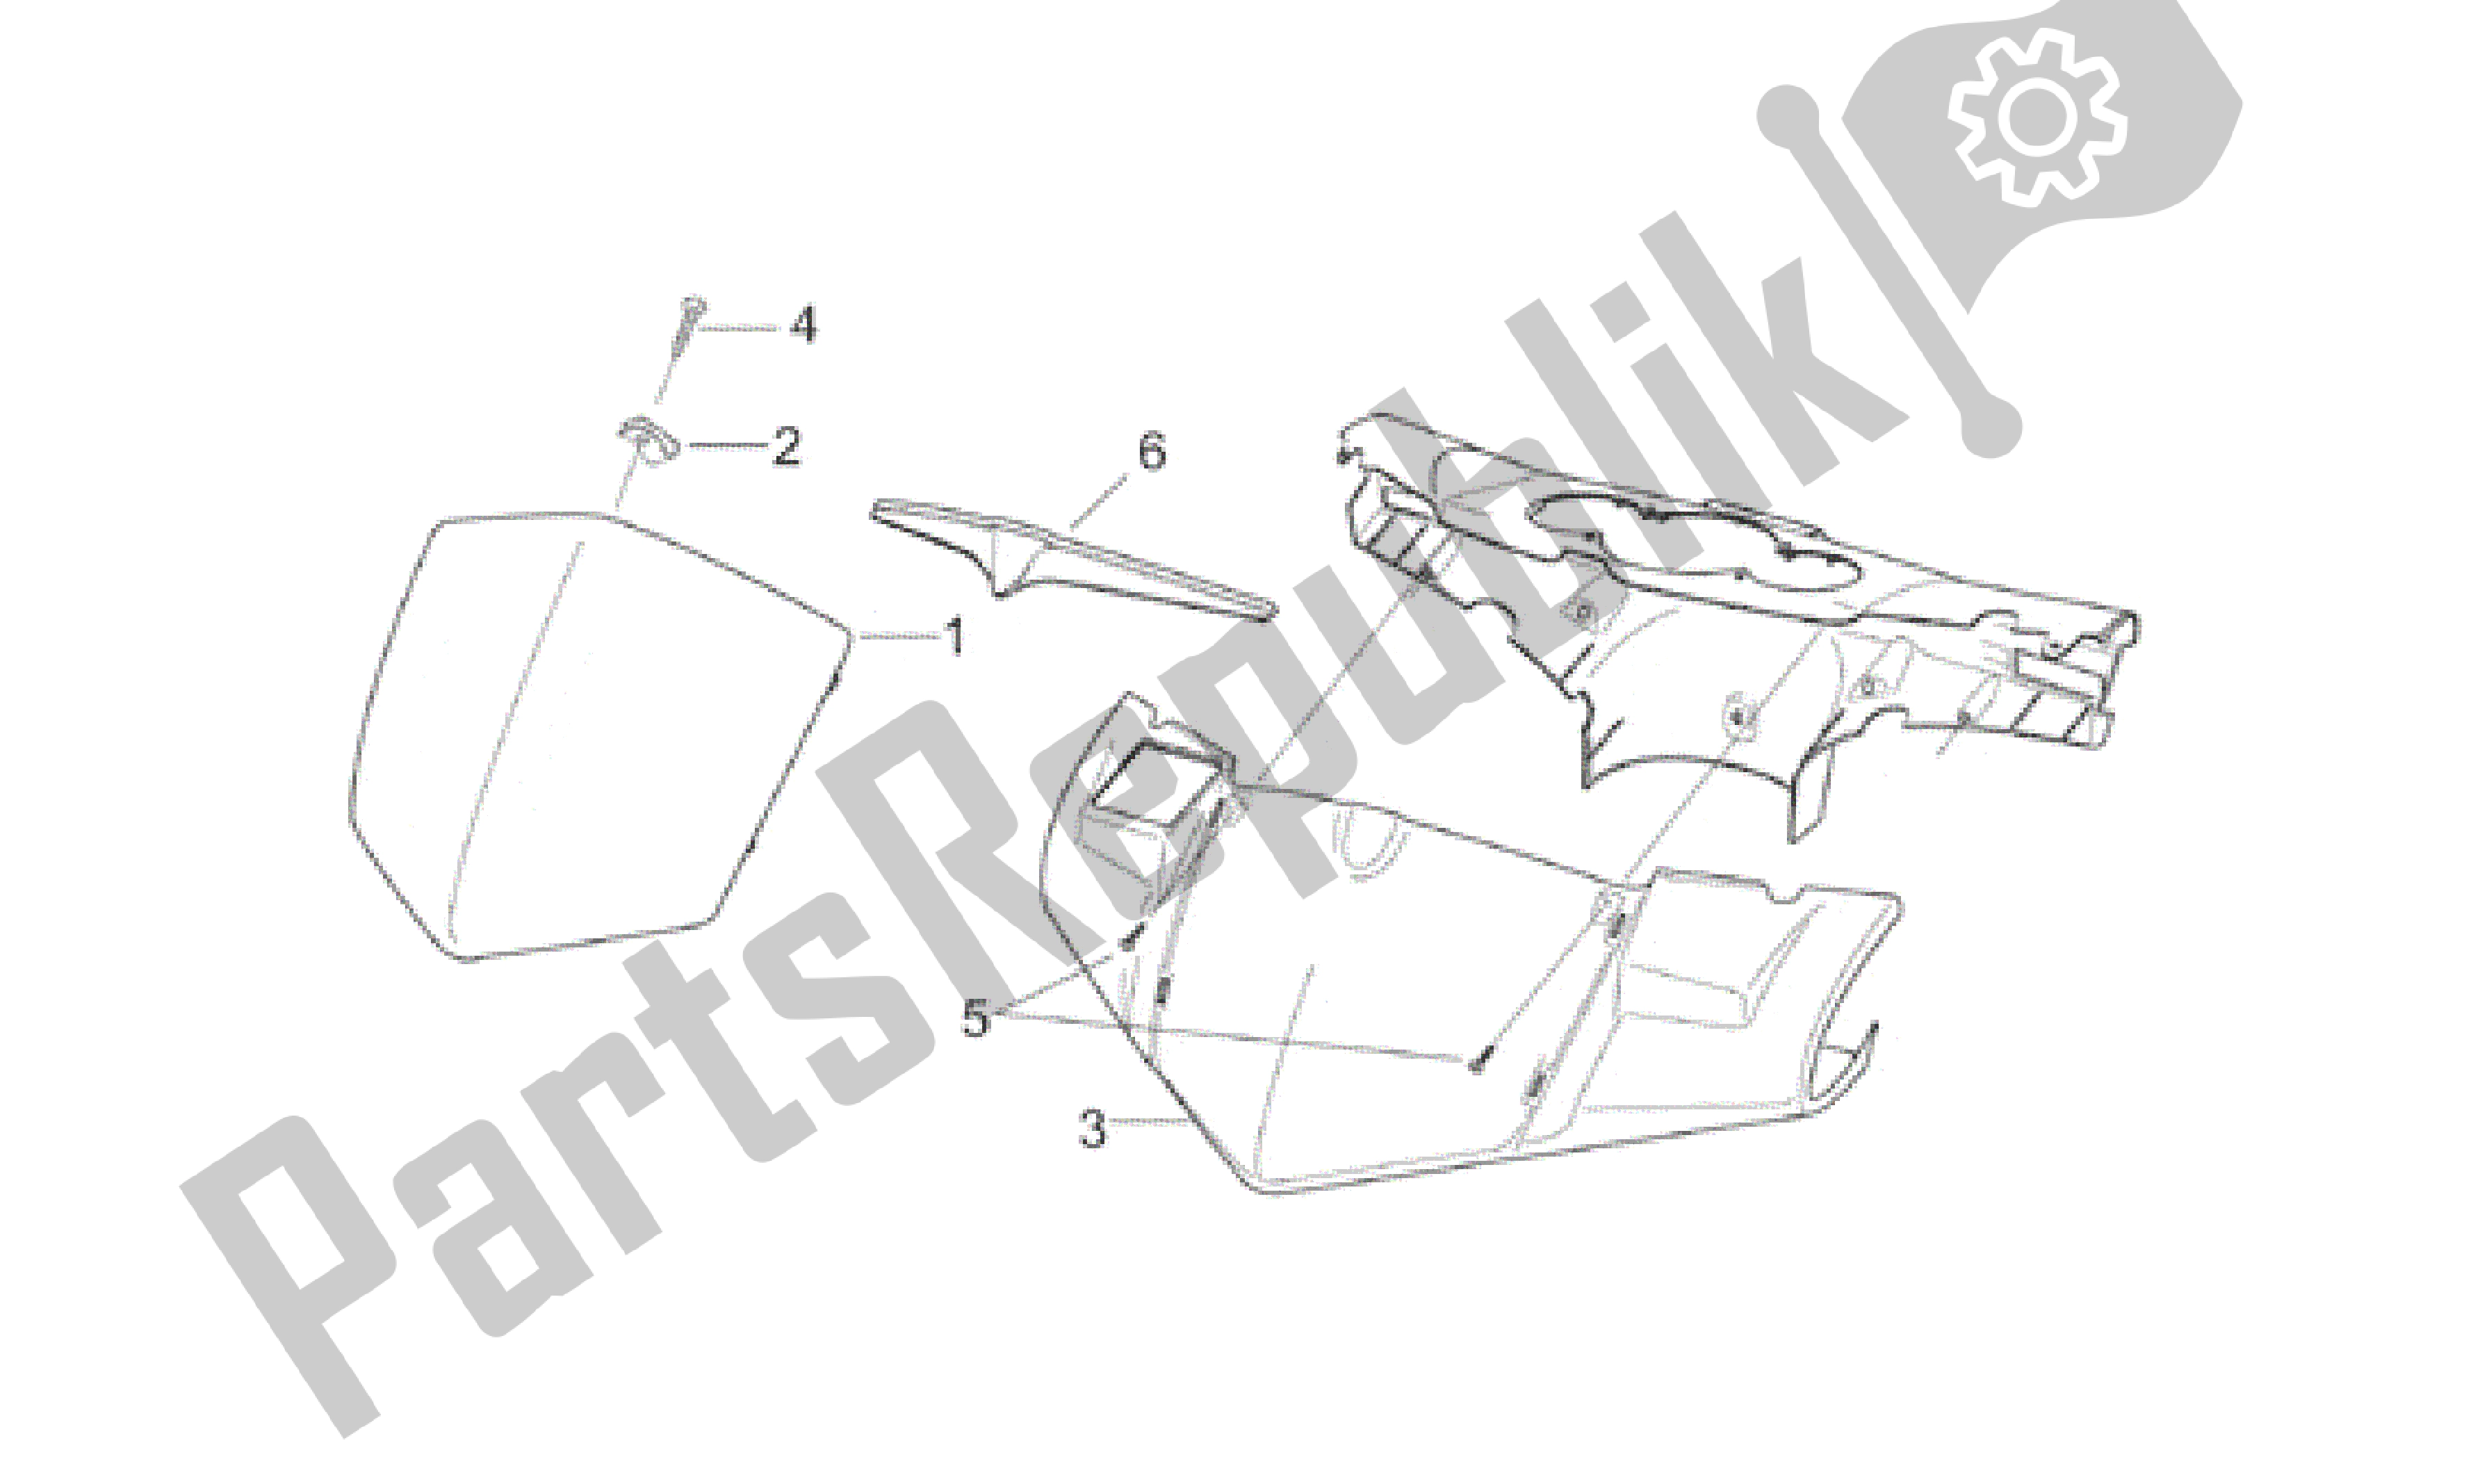 All parts for the Front Body I - Frontal Shield of the Aprilia Sonic 50 1998 - 2001